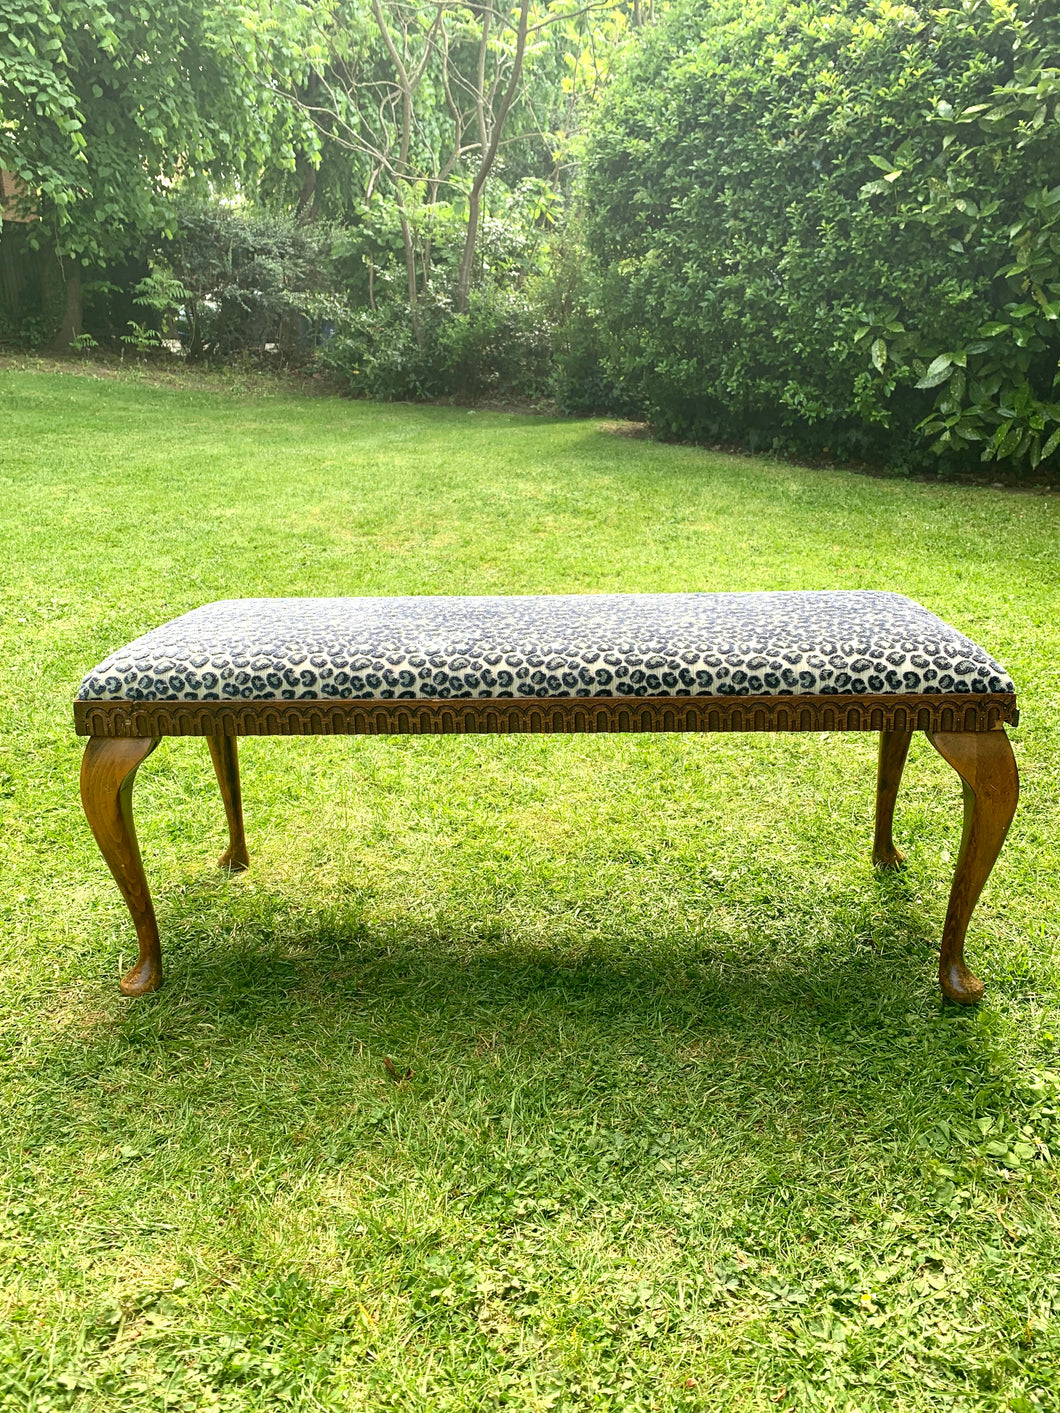 Antique Bench Upholstered in Colefax and Fowler Velvet Leopard Print Fabric